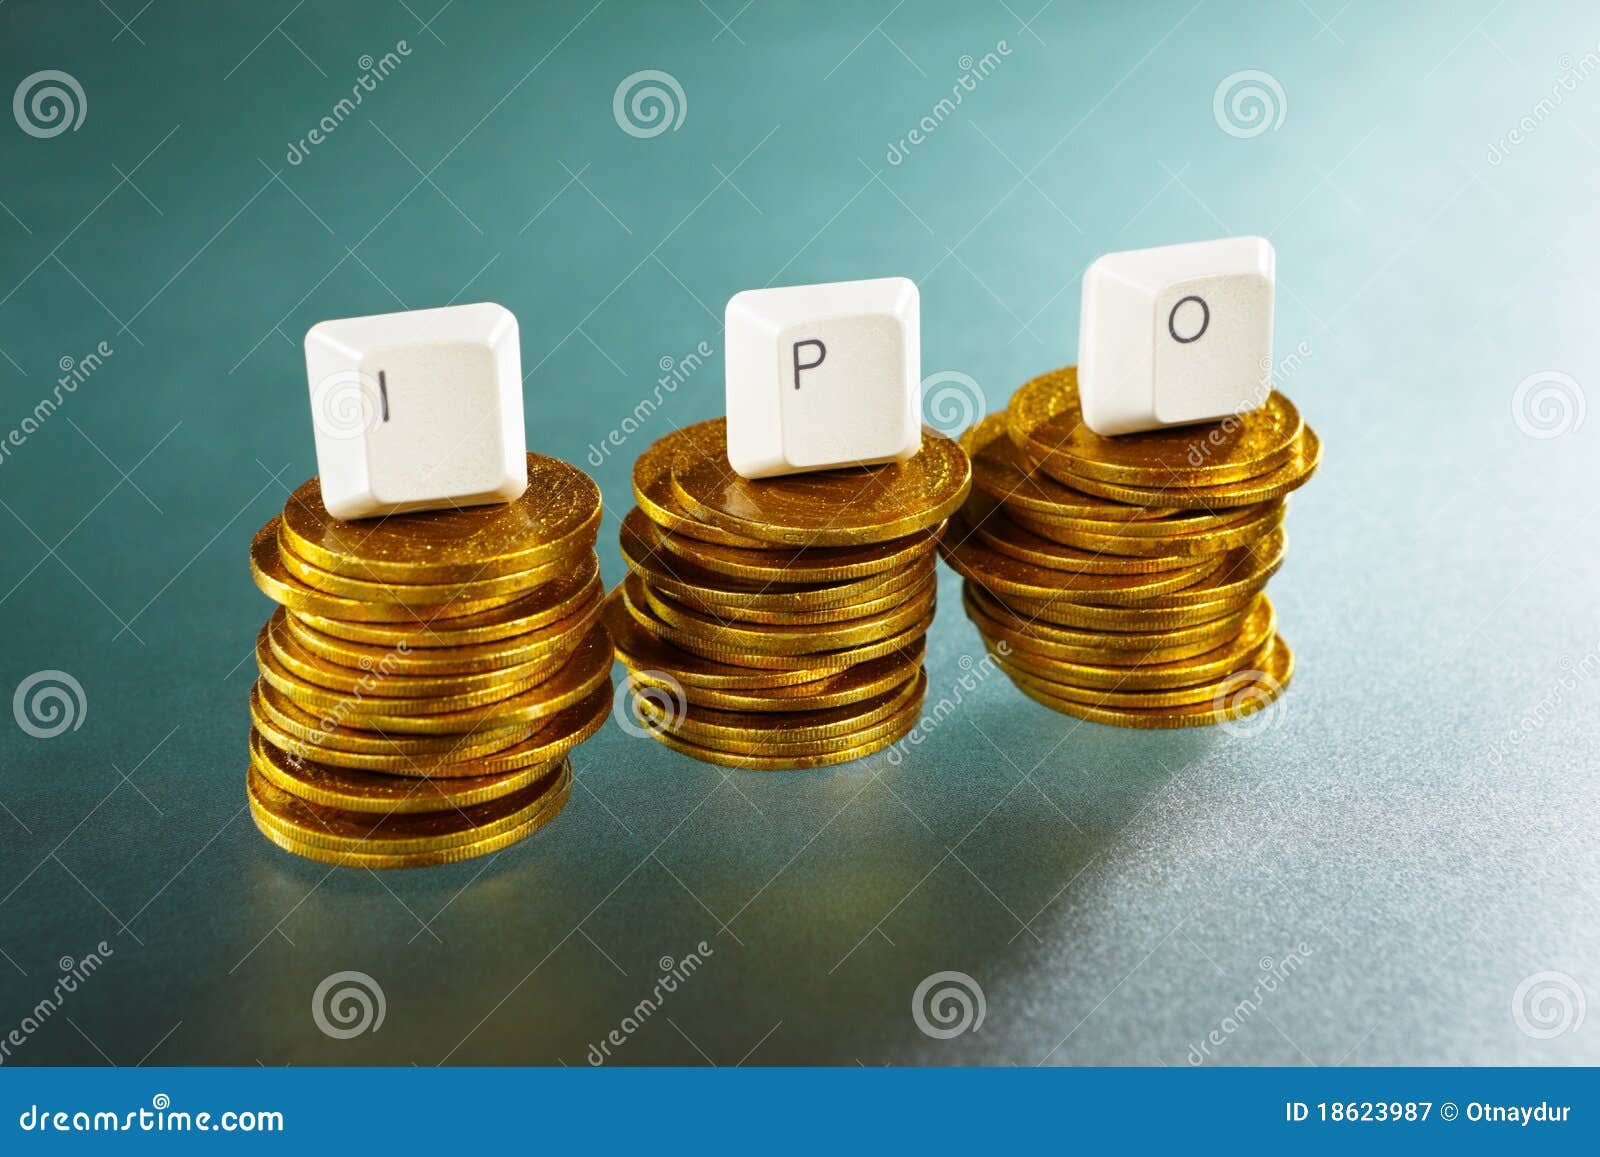 IPO Letter On Gold Coins Stack Stock Image - Image of ...